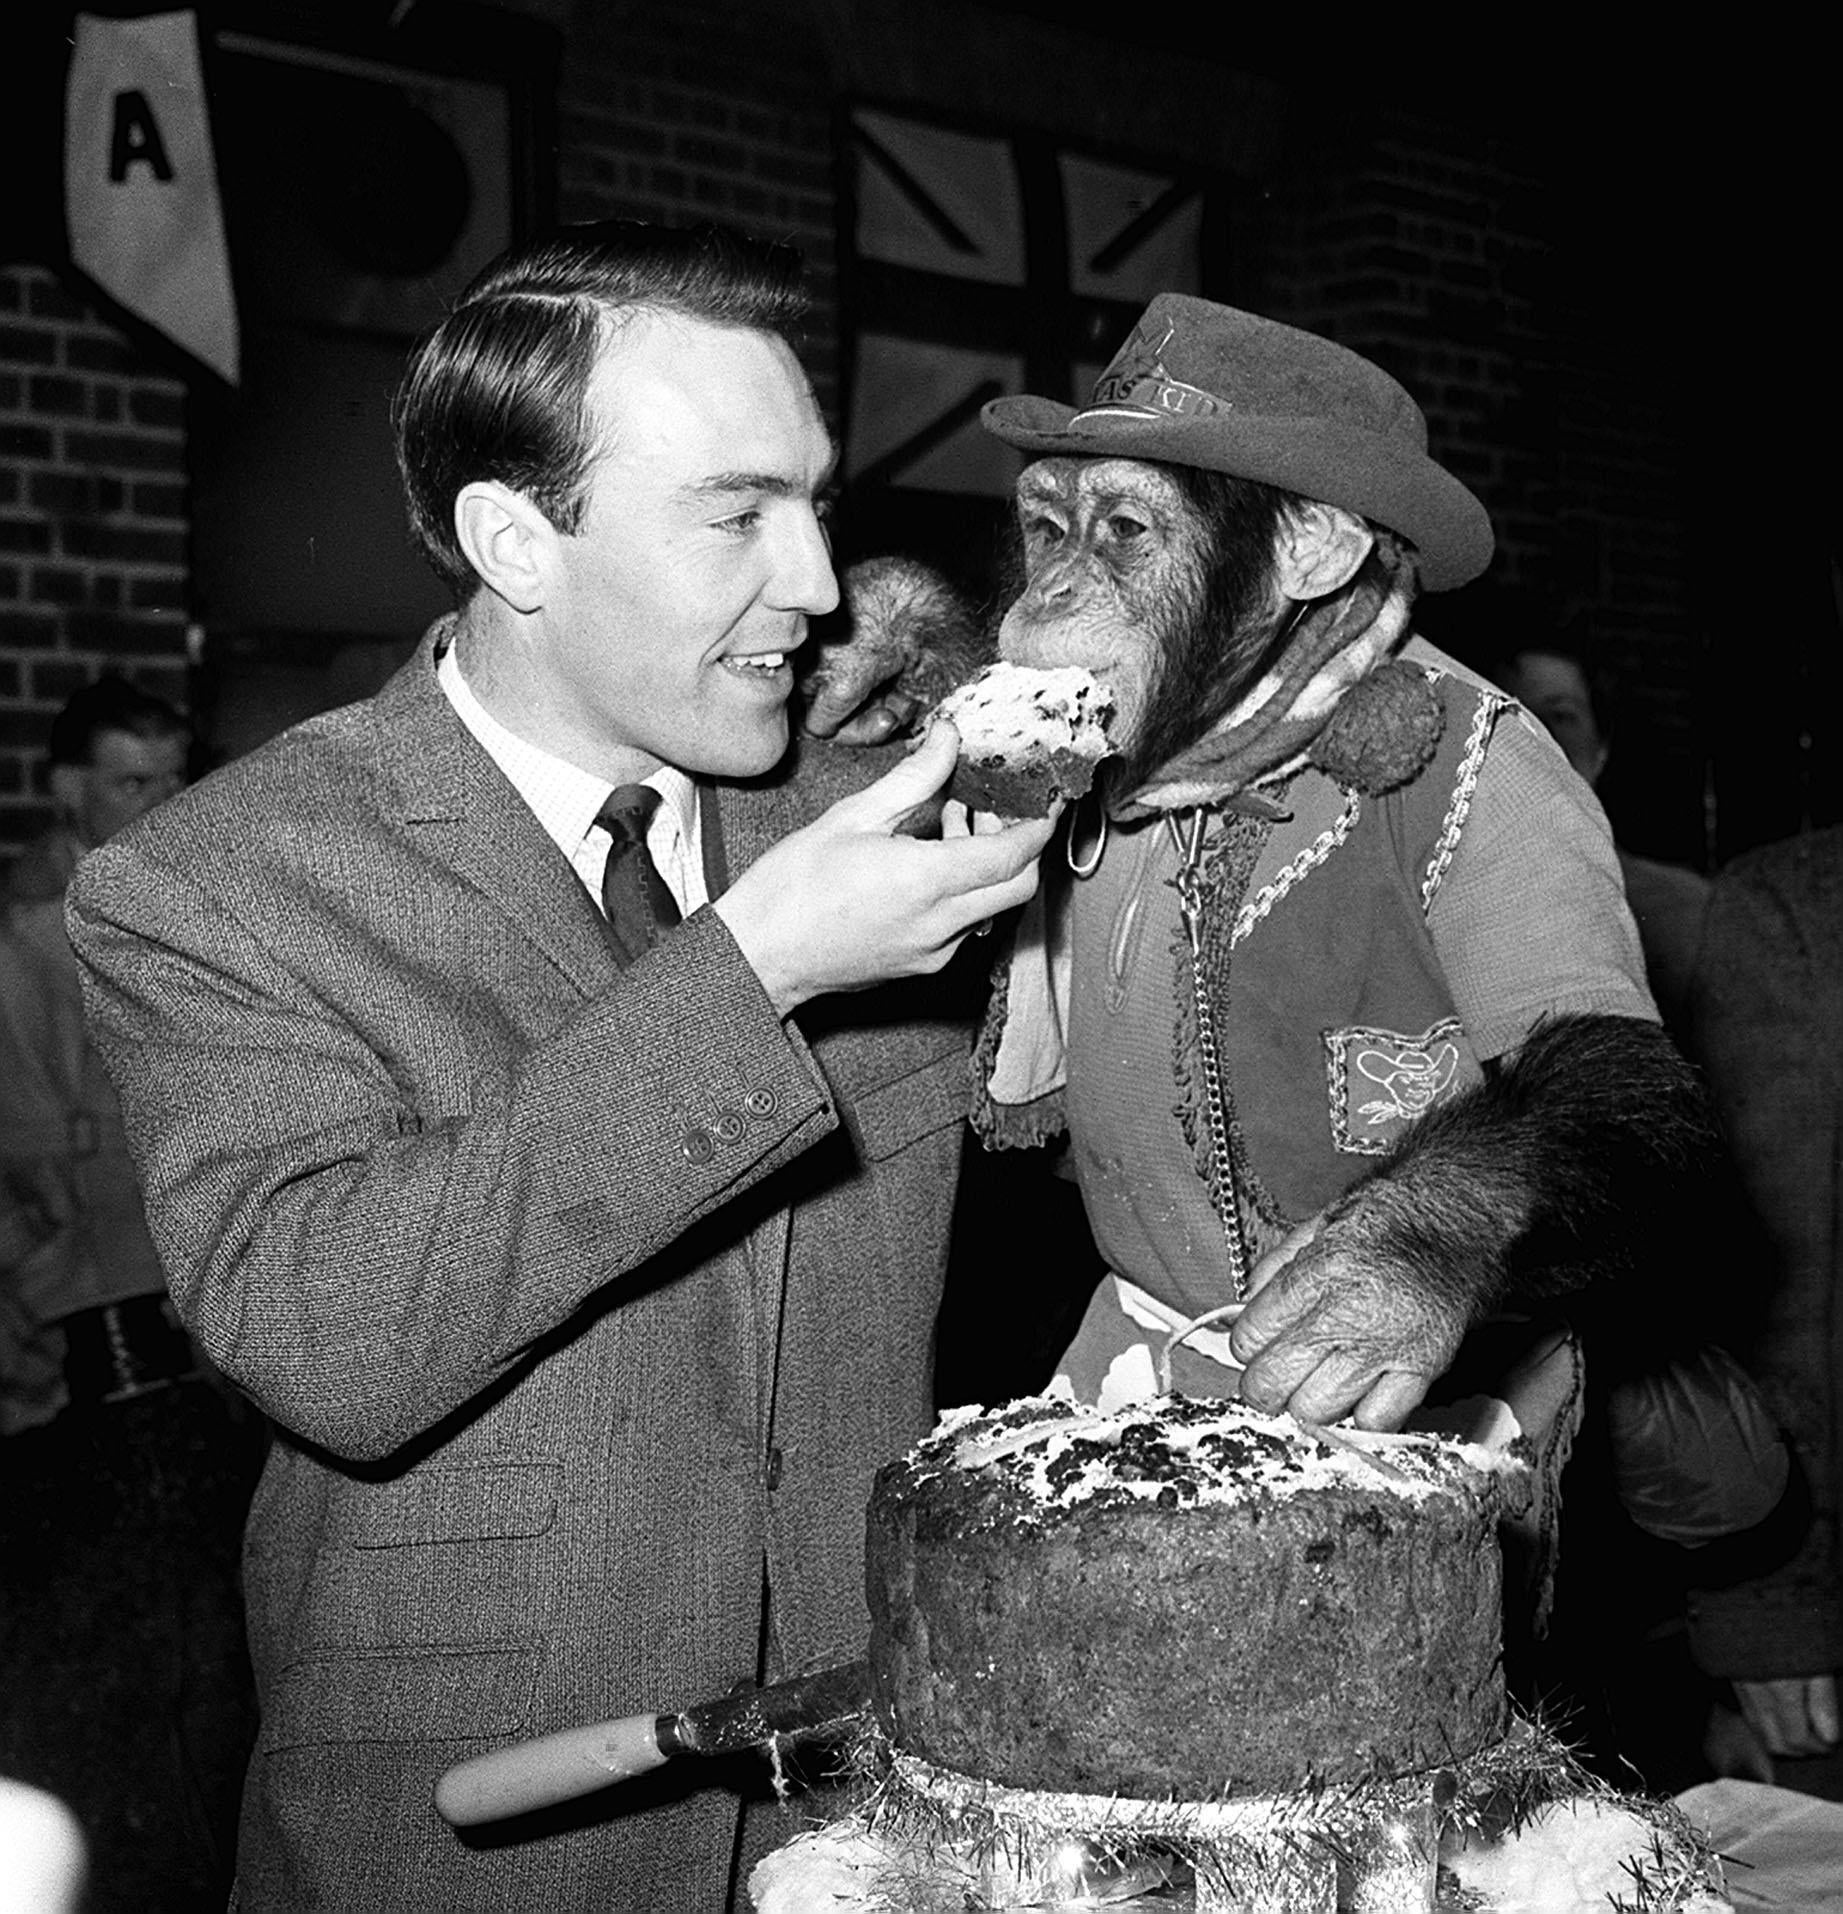 Jimmy Greaves meeting Linda the chimpanzee in 1964 (PA)